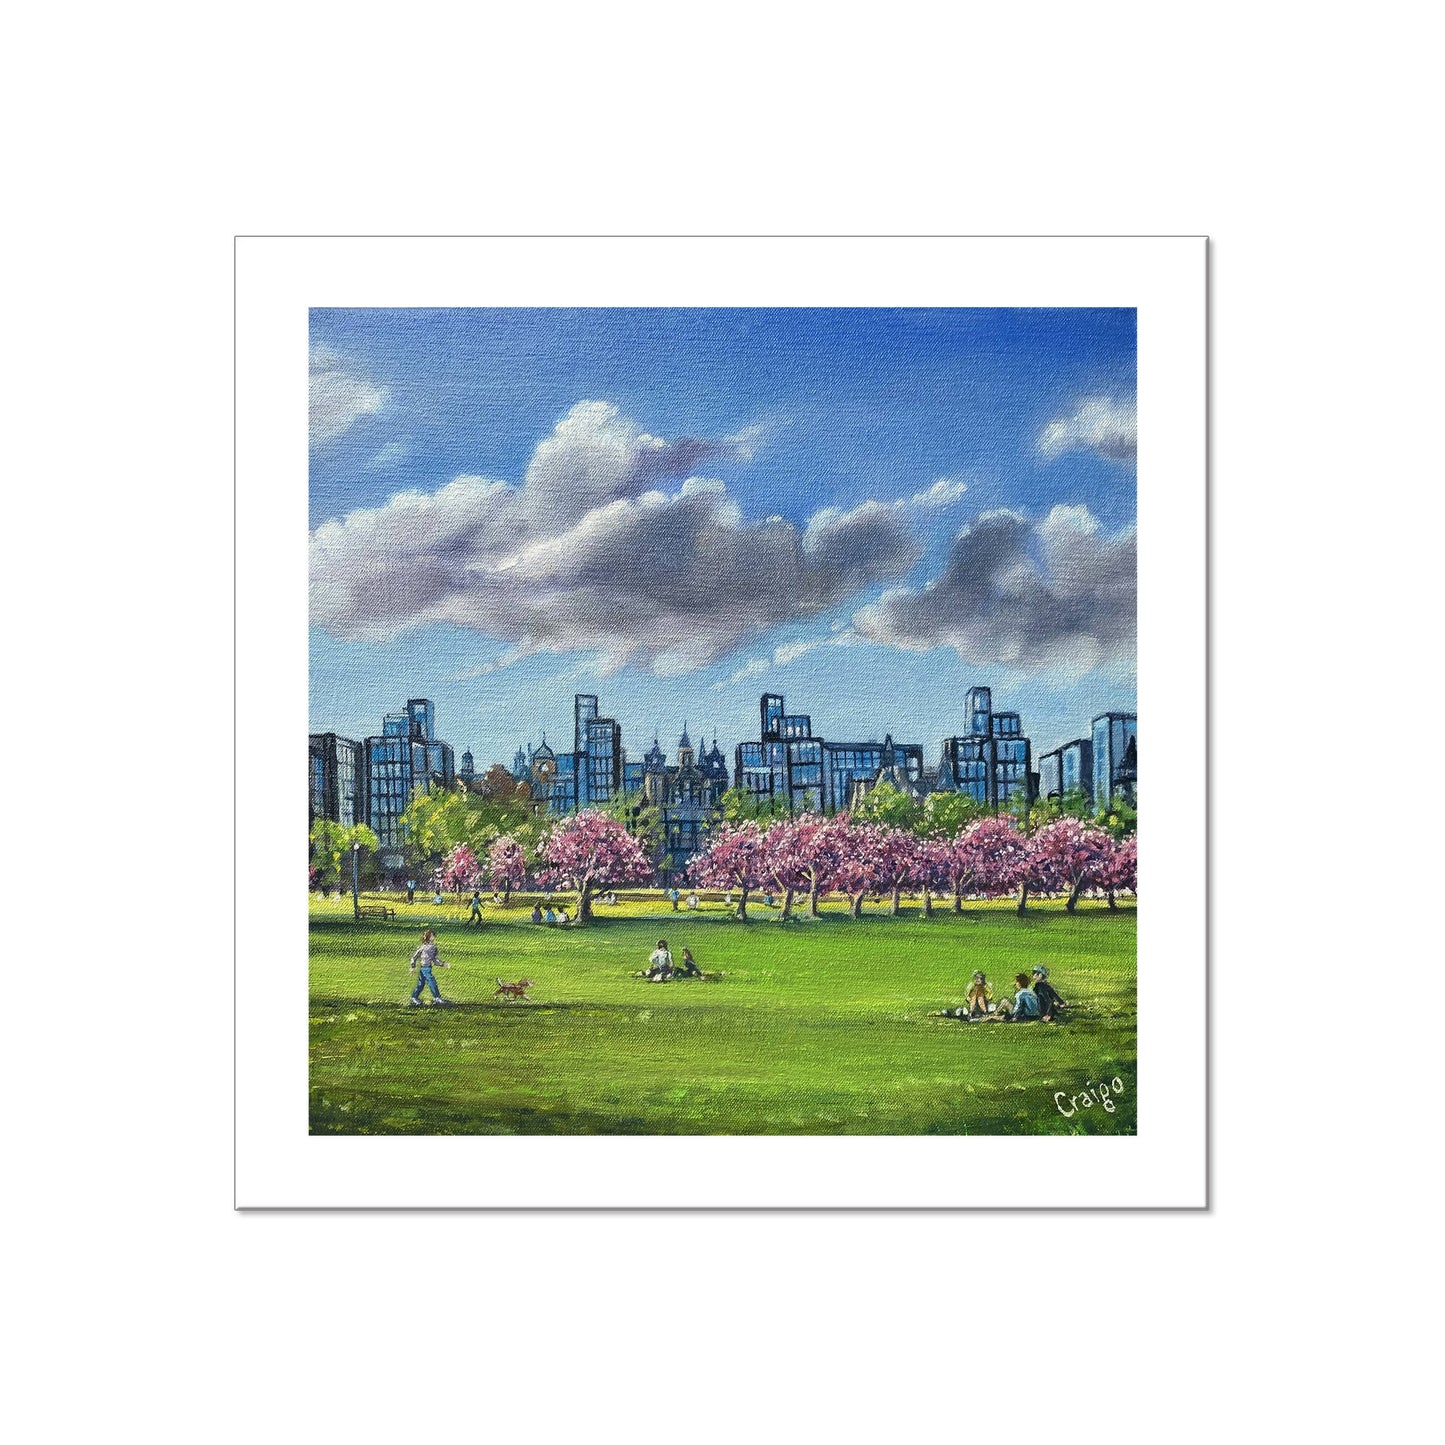 'The Meadows in Spring' - Giclee Fine Art Print 30x30cm